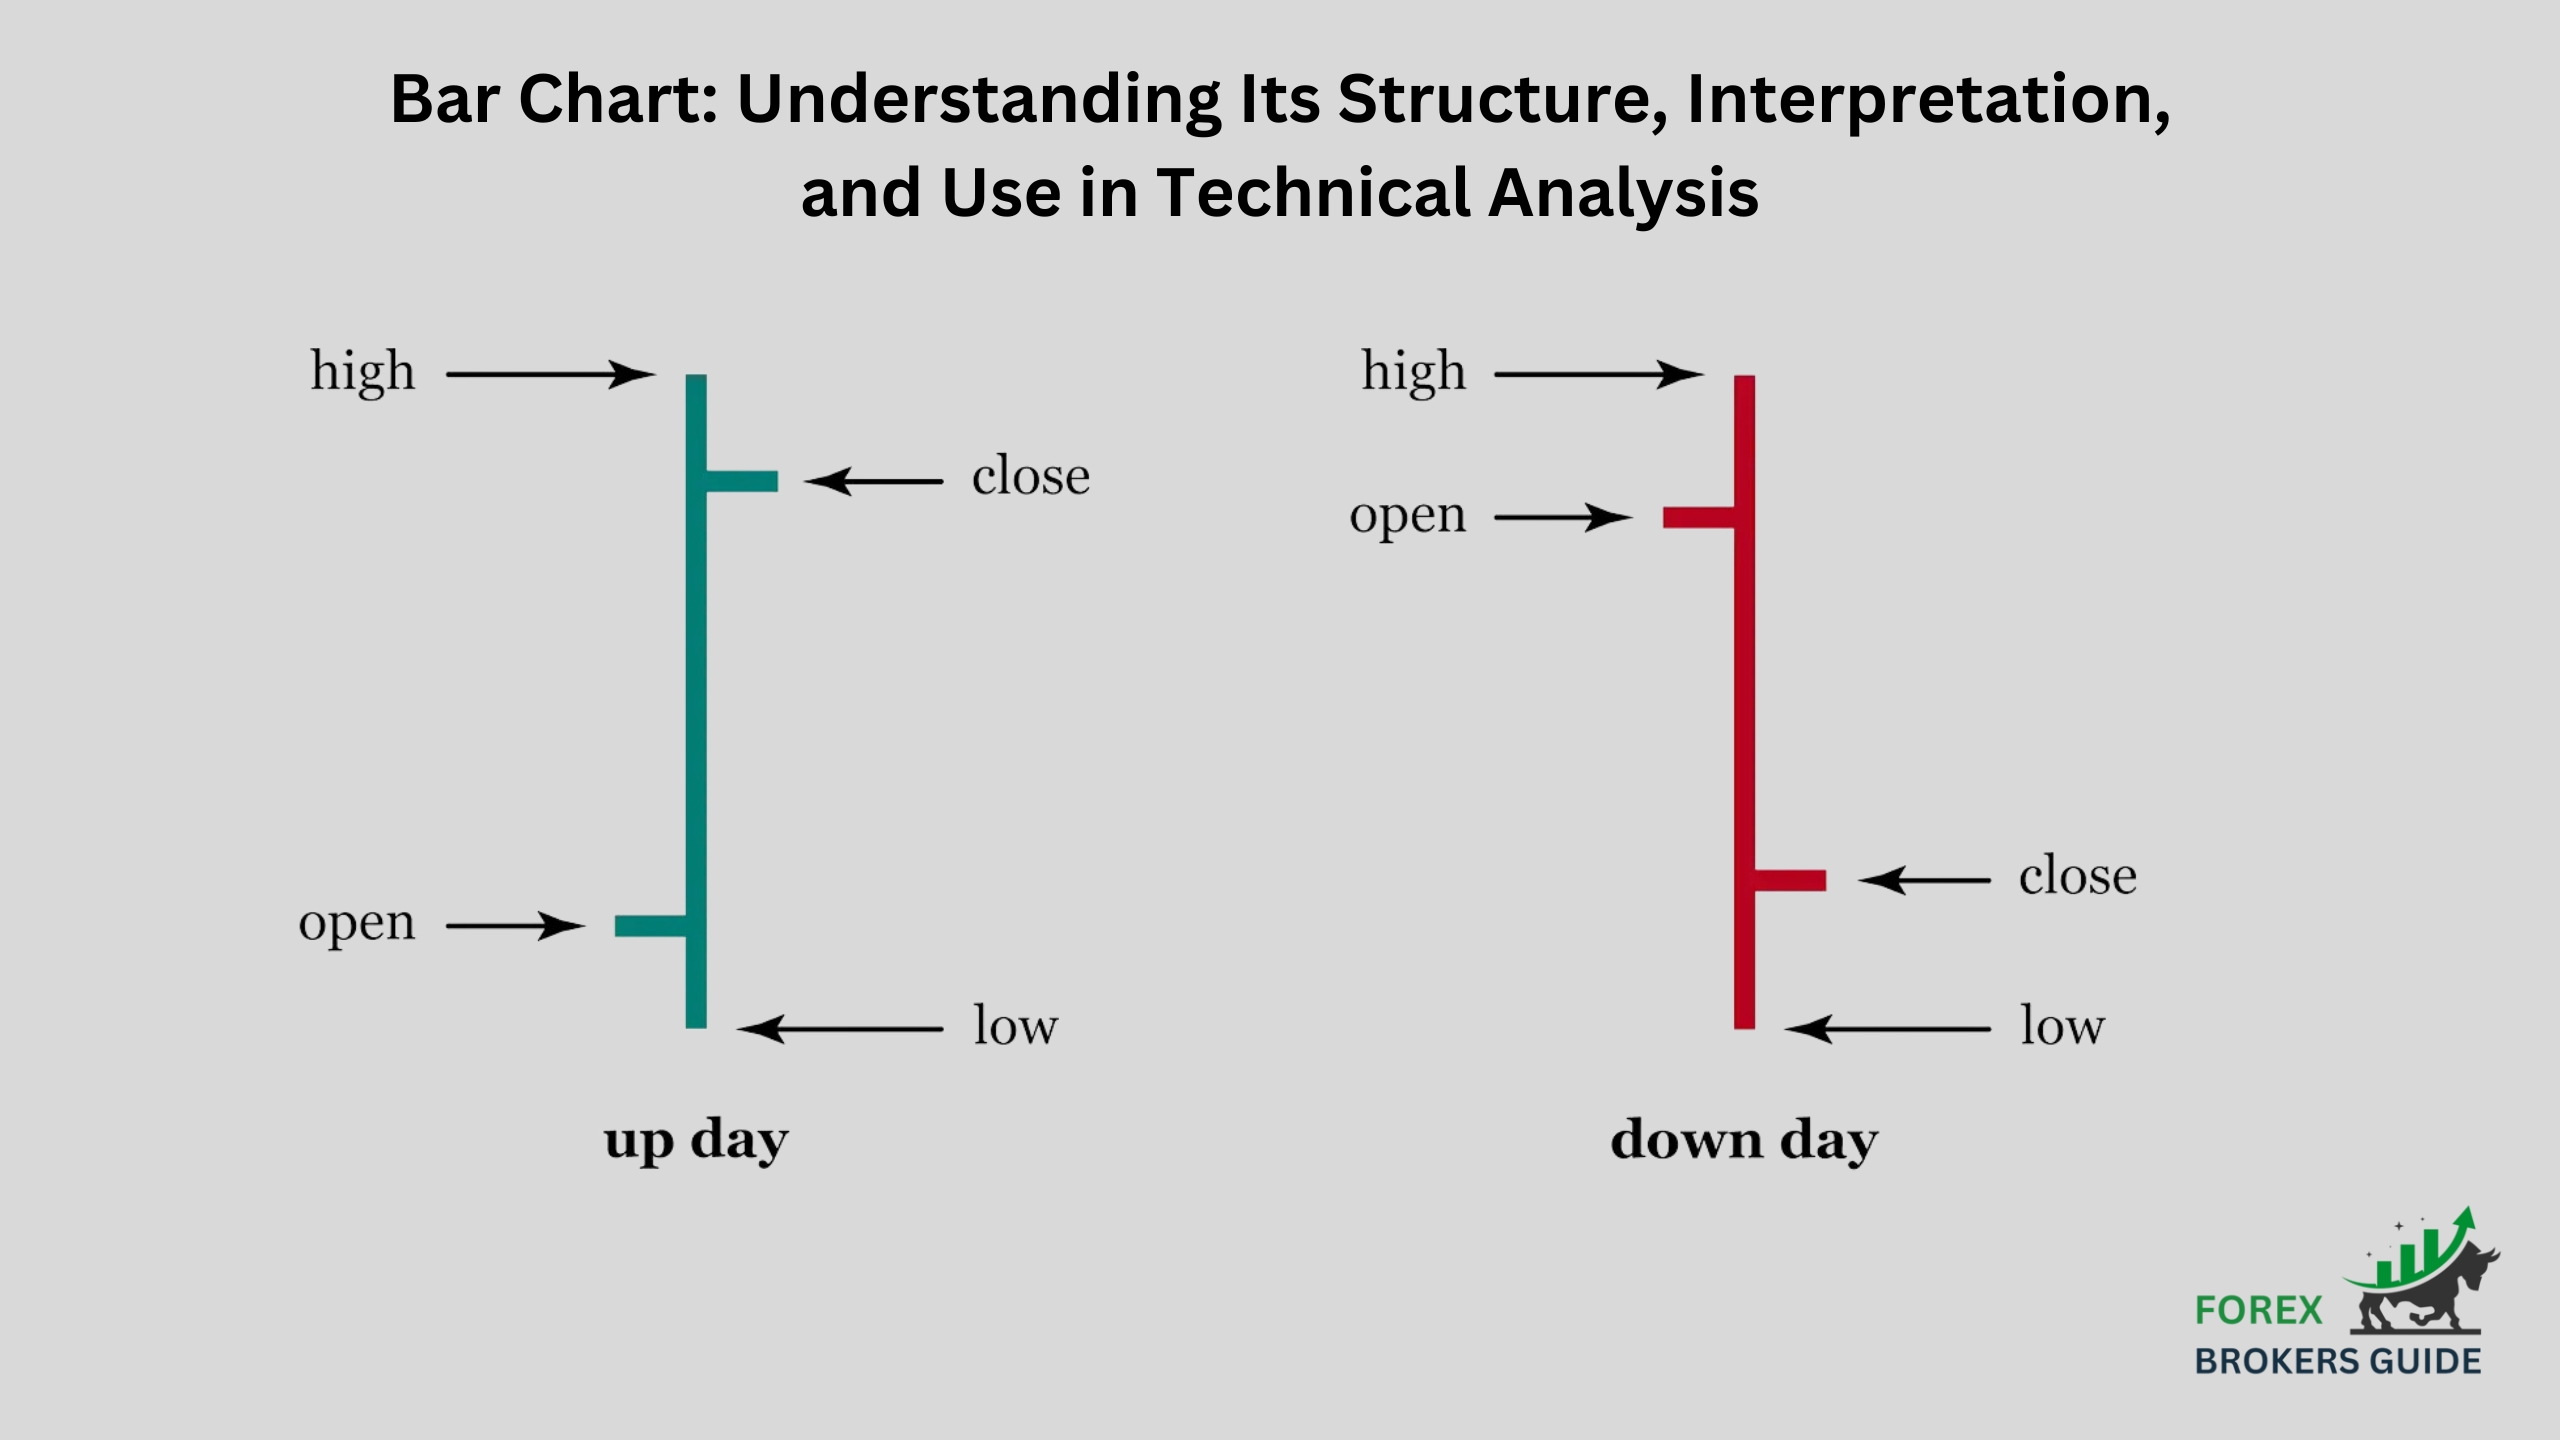 Bar Chart Understanding Its Structure, Interpretation, and Use in Technical Analysis